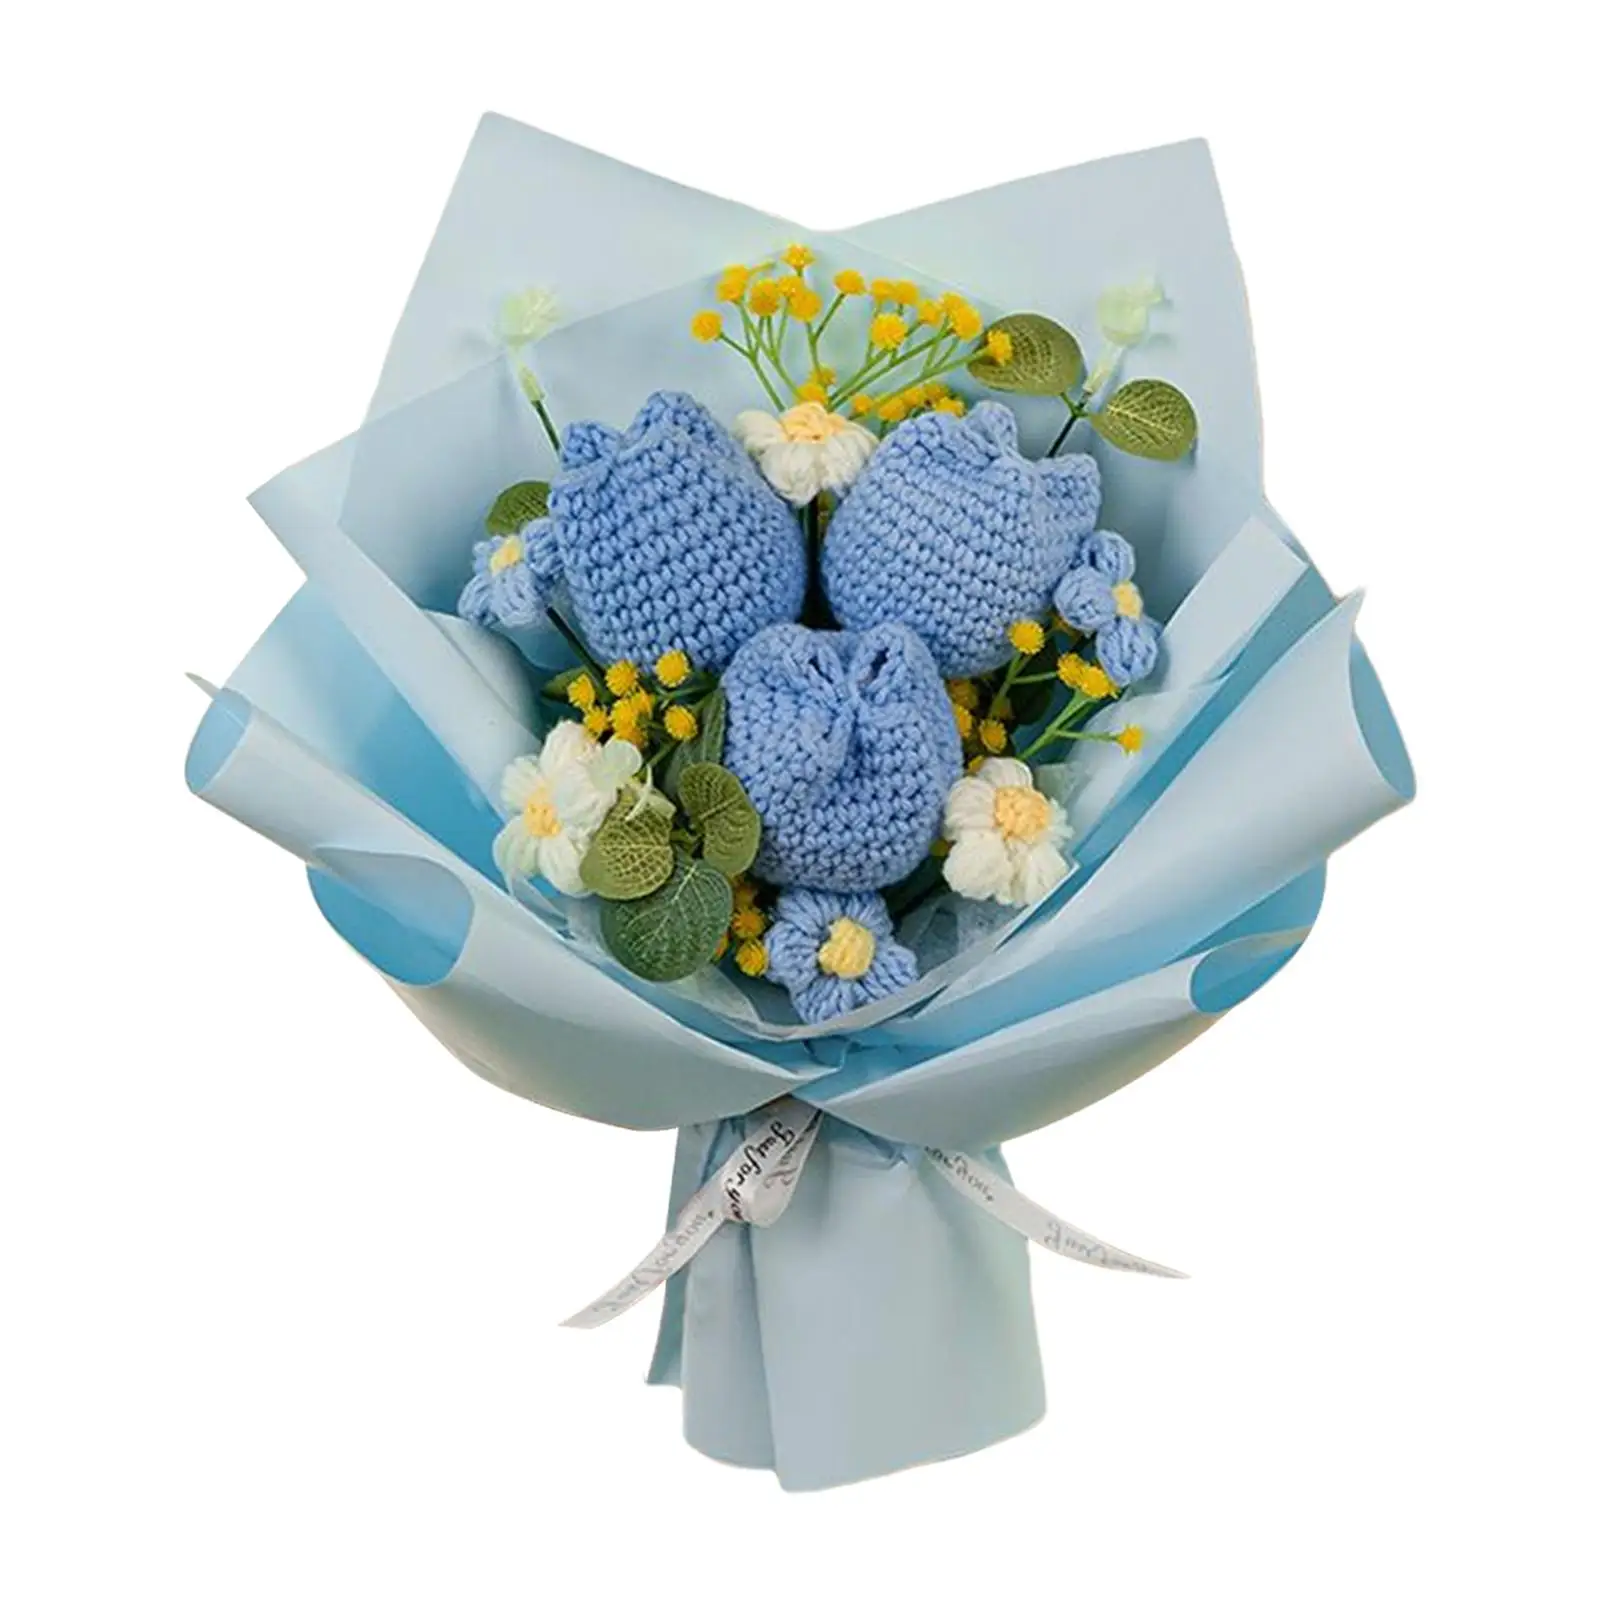 Artificial Flowers Fake Flowers with Eucalyptus Gift Knitted Flowers Crochet Flower Bouquet for Party Shelf Wedding Anniversary